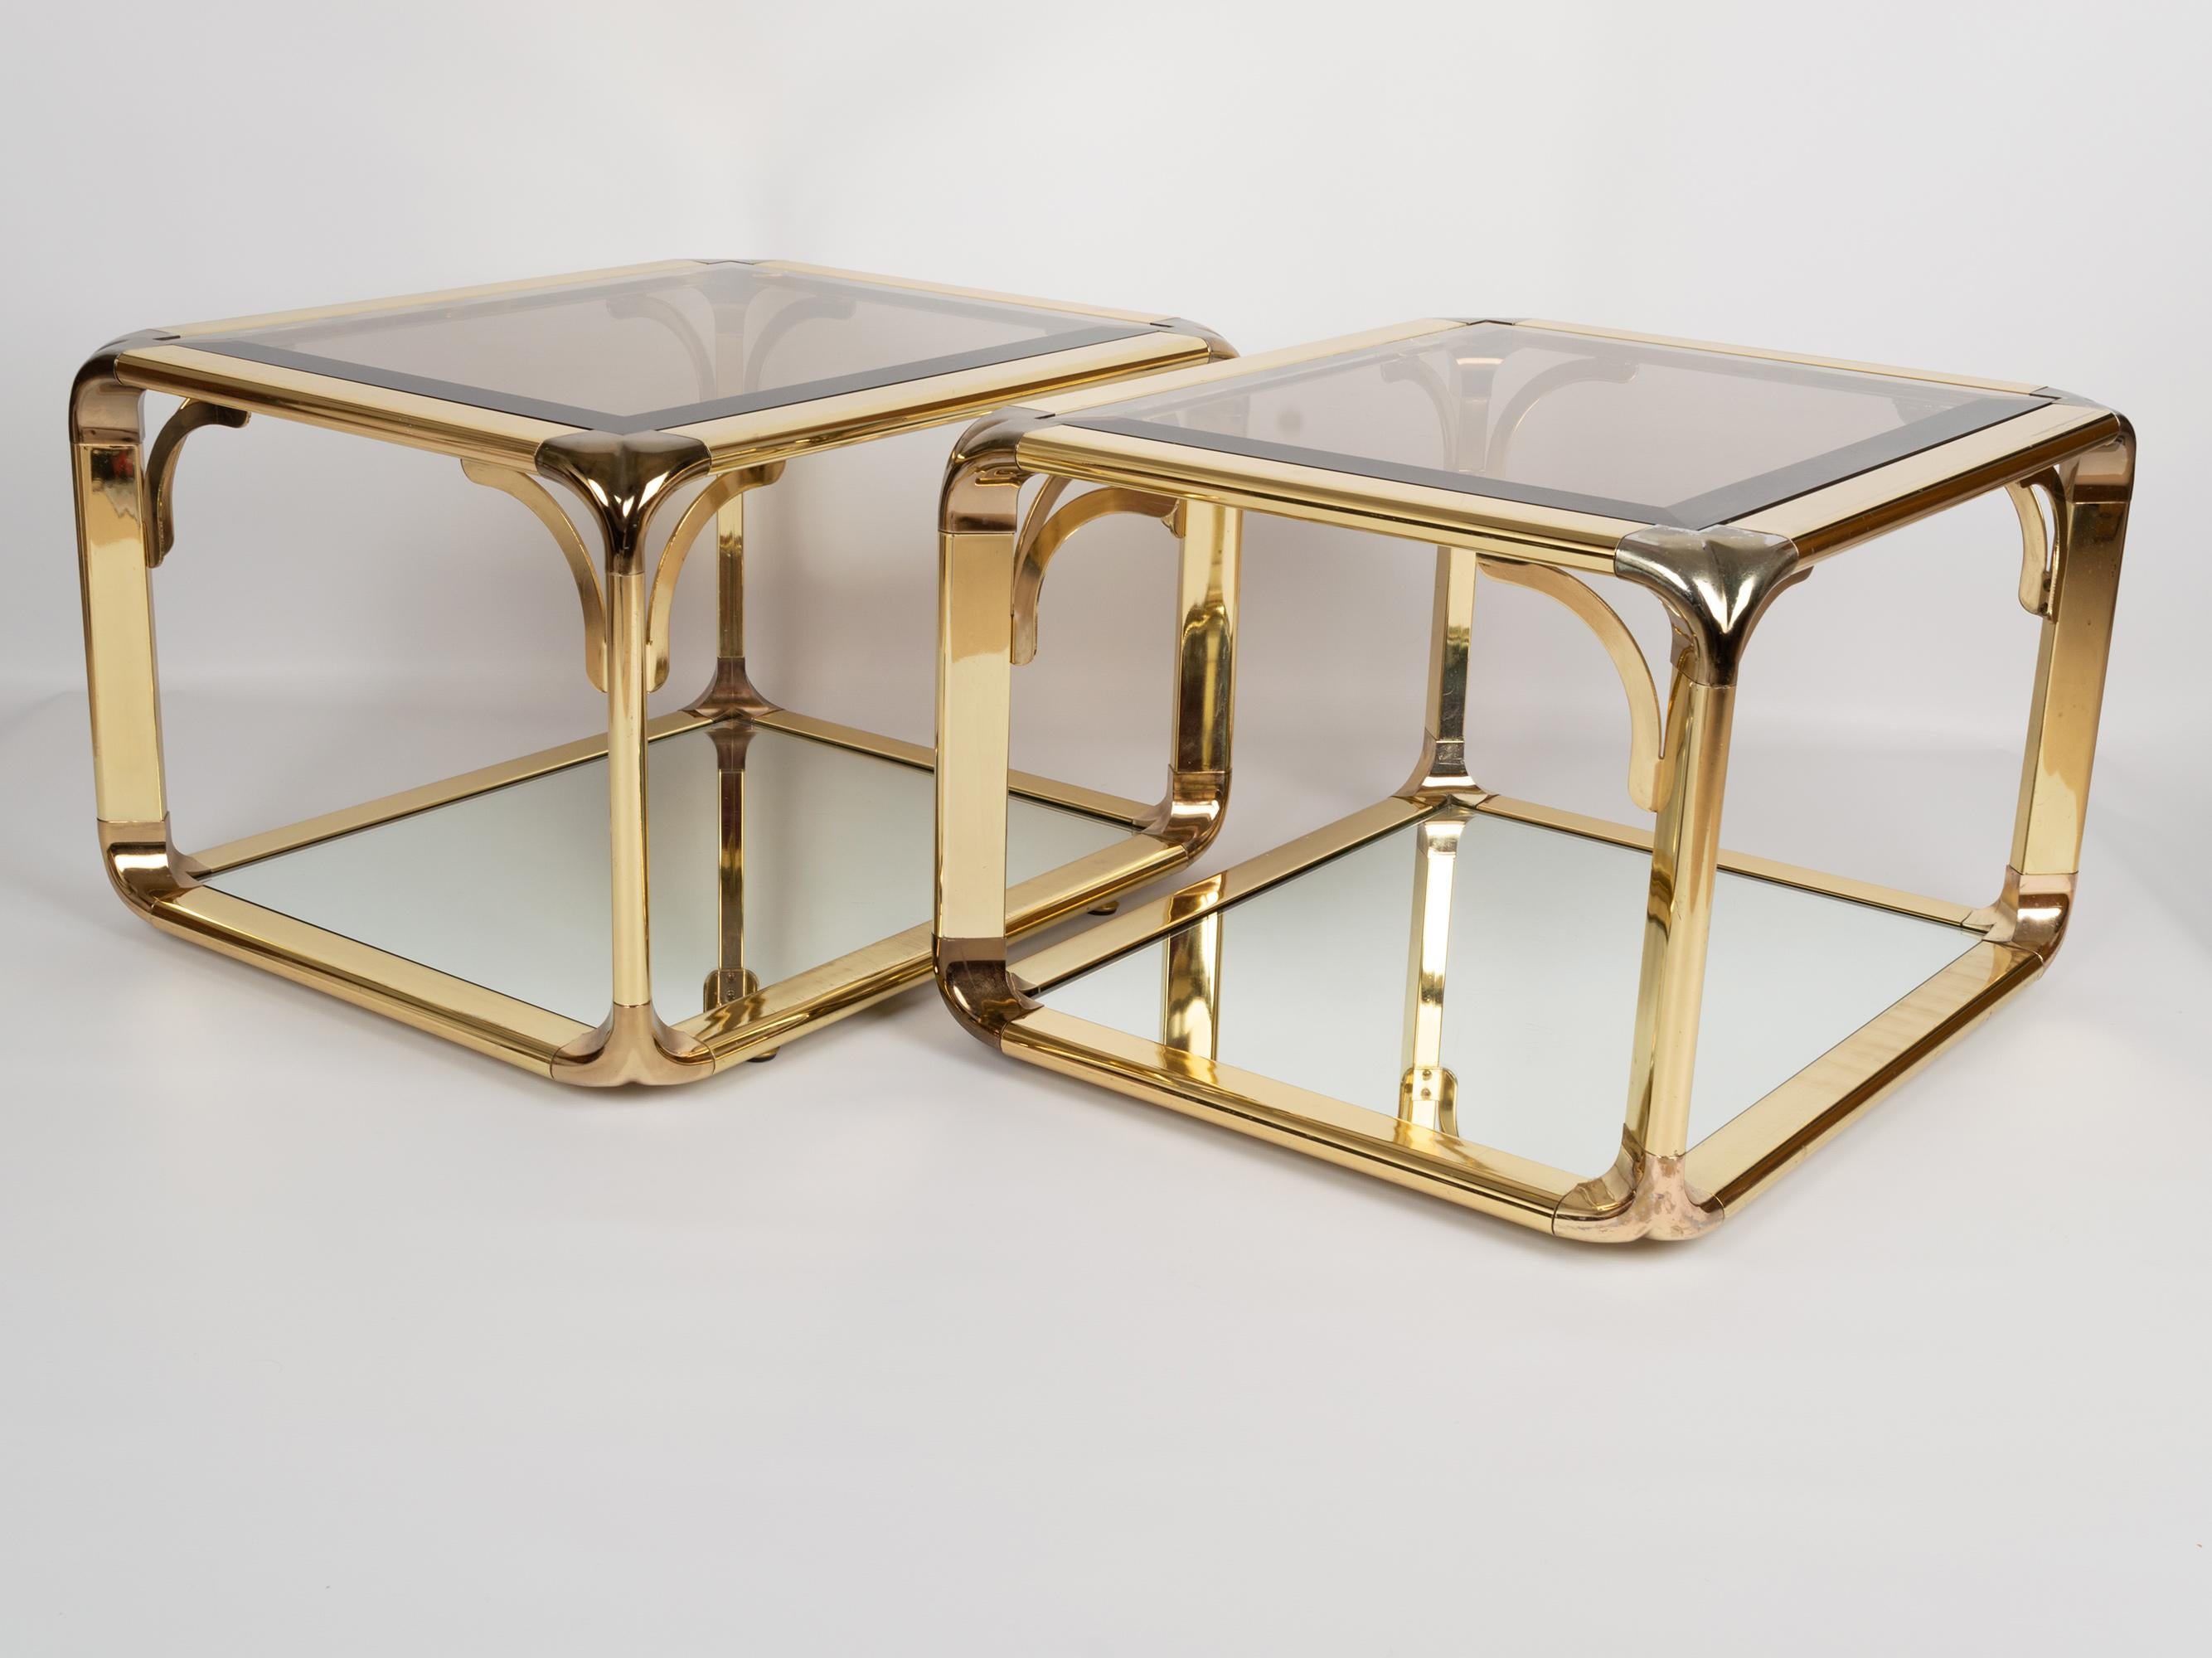 Pair of Mirrored Gold Chrome End Tables / Side Tables, Belgium, circa 1970 For Sale 3